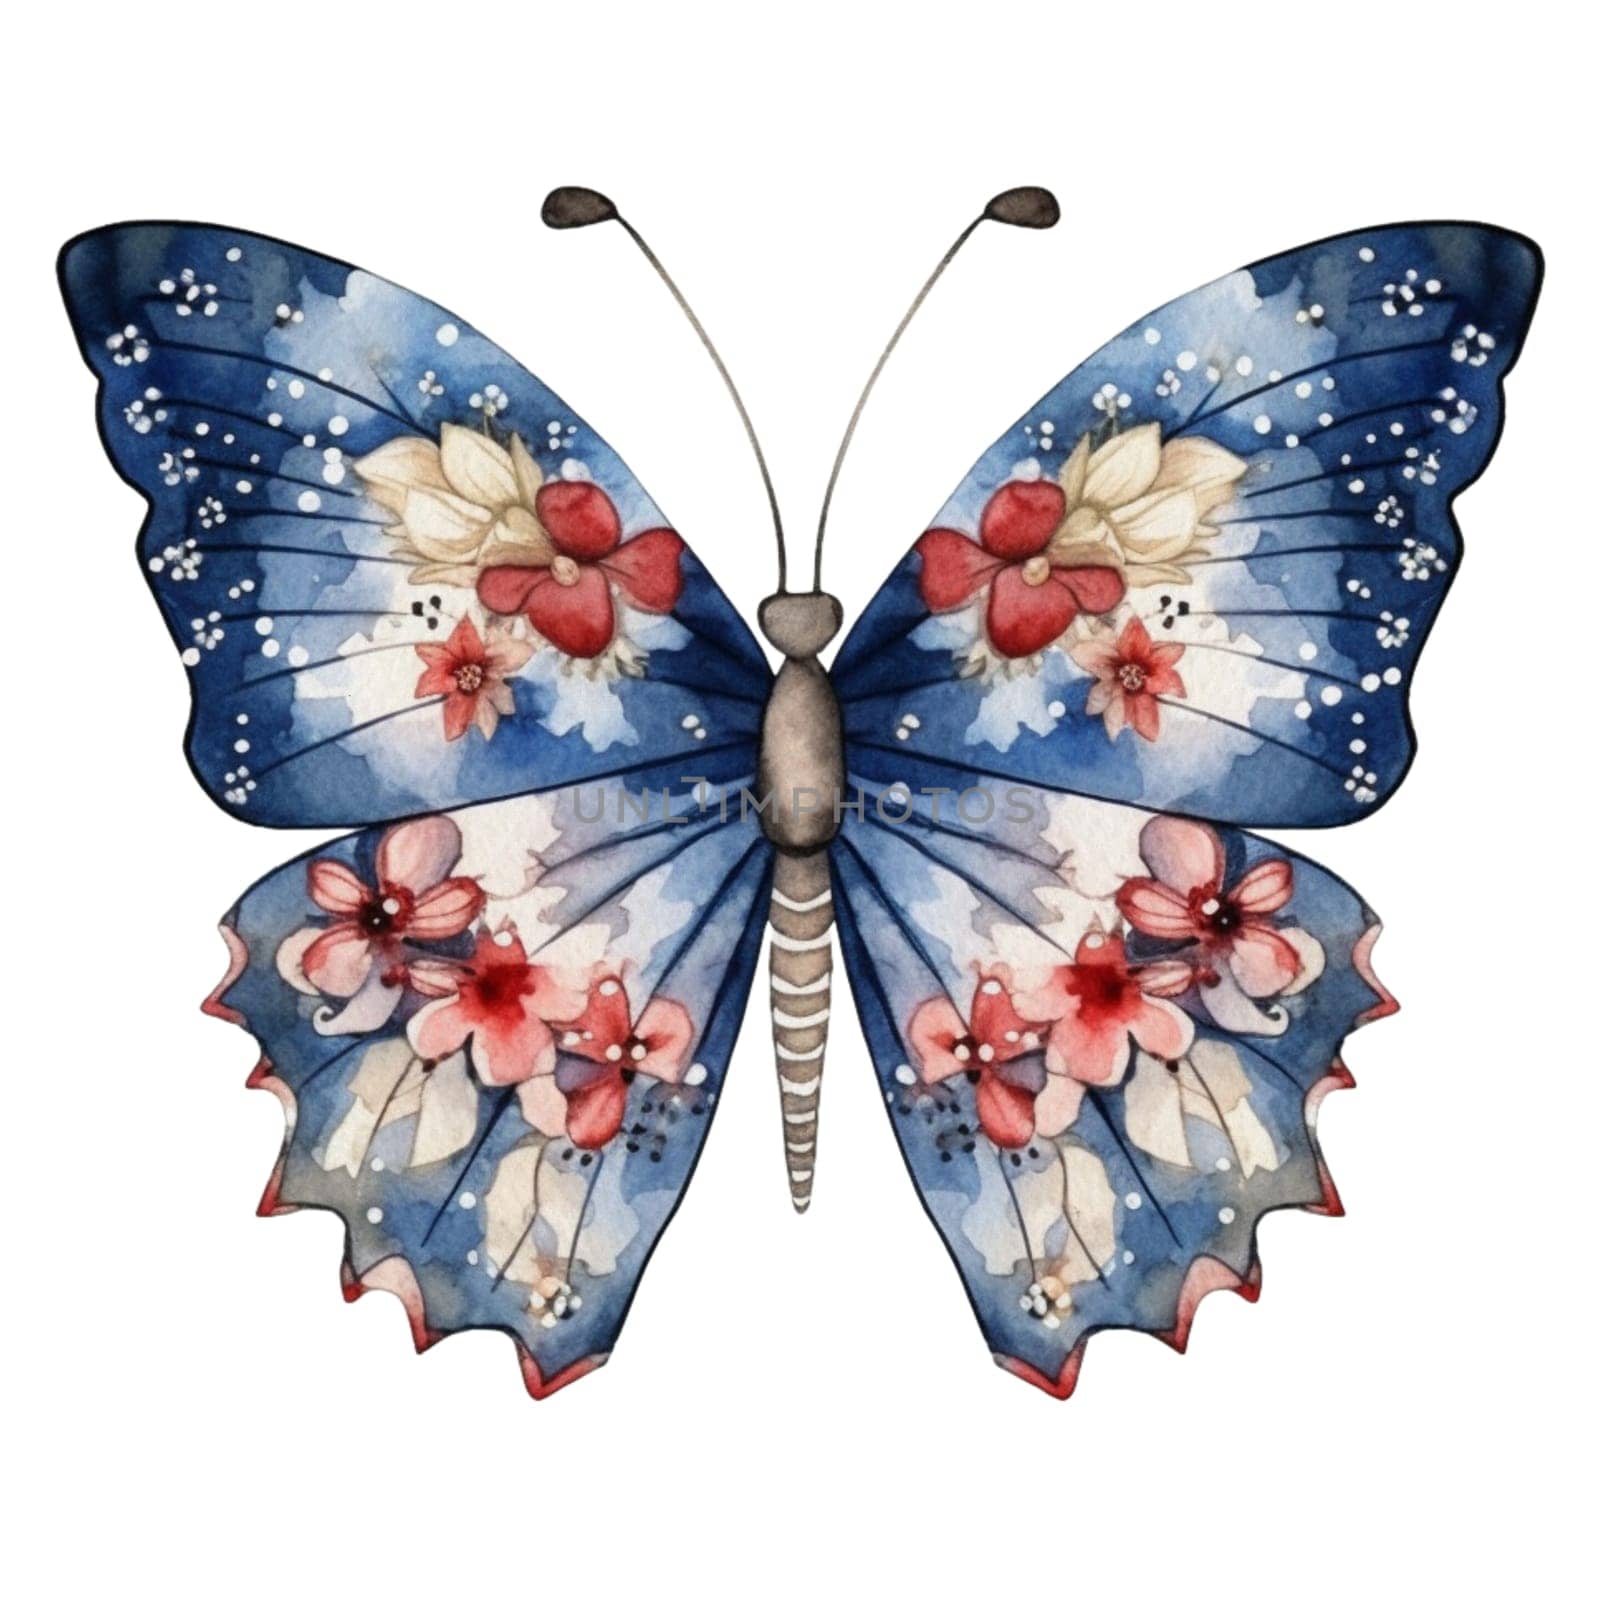 Watercolor Patriotic Butterfly 4th of July Illustration Clipart. Isolated butterfly on white background. by Skyecreativestudio